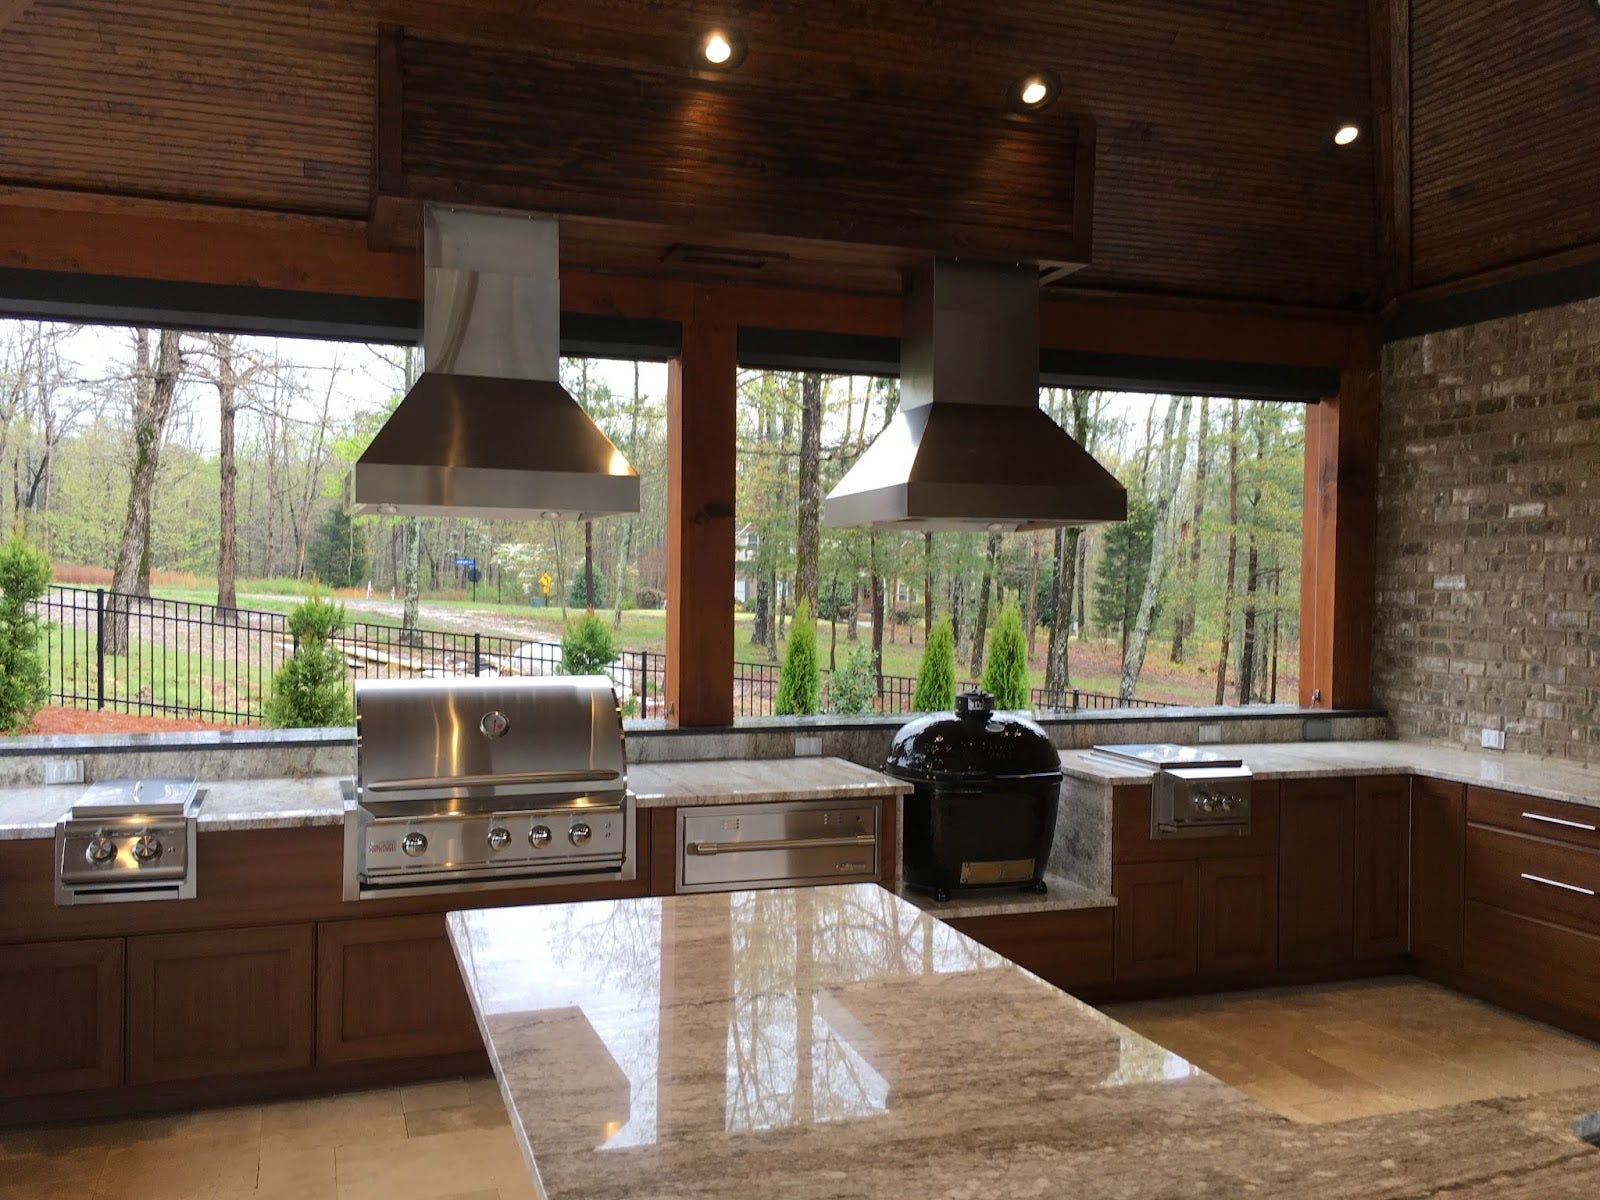 Luxurious and fully-fitted outdoor kitchen with dual extraction units, modern appliances, and wooden storage, surrounded by a tranquil woodland setting.